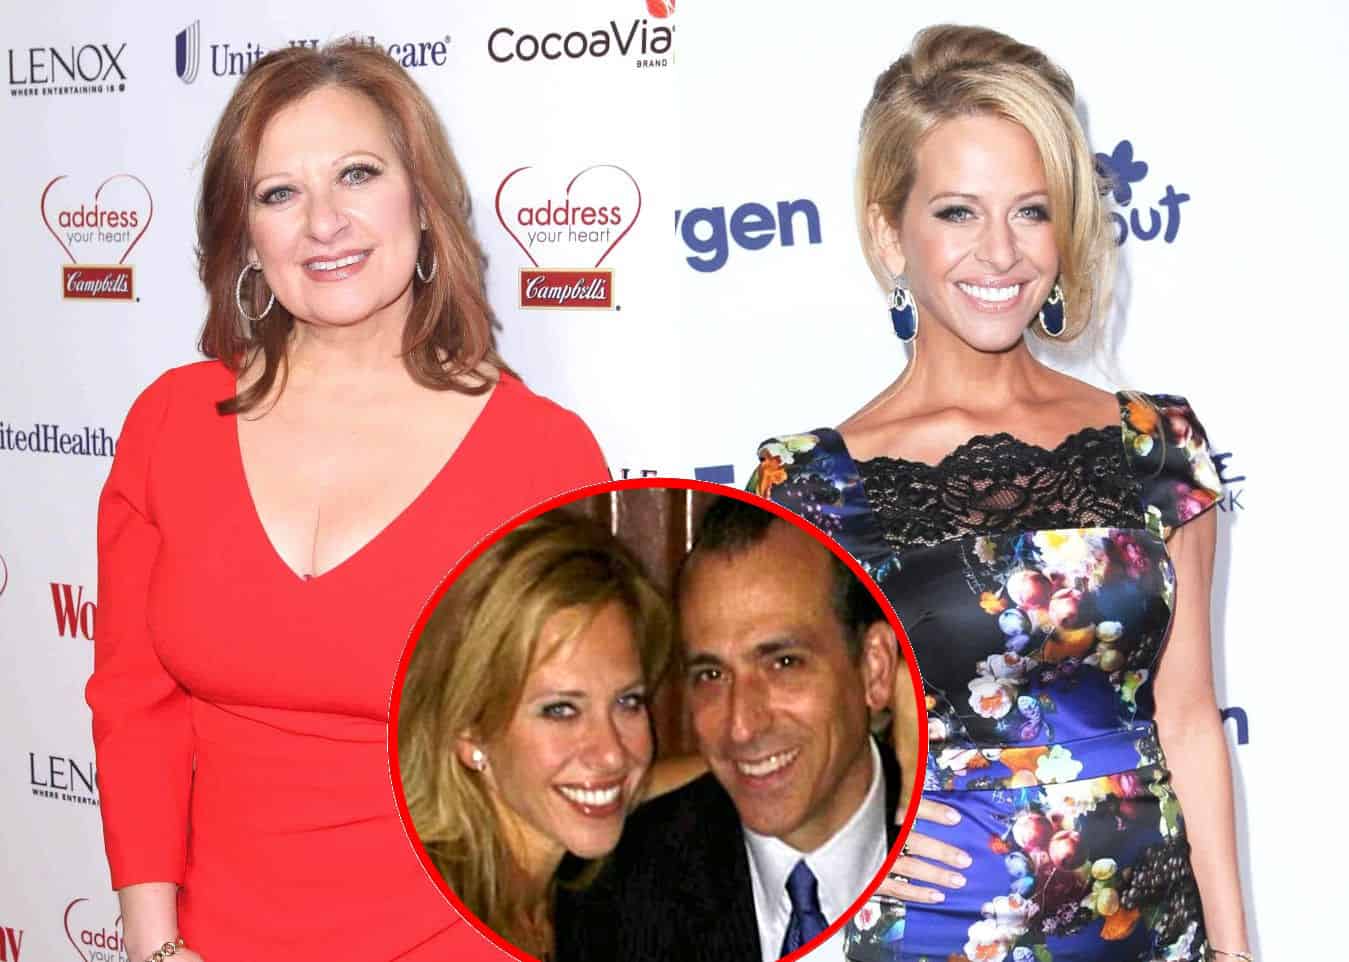 RHONJ's Caroline Manzo "Heartbroken" and Wants to "Know the Truth" After Brother-in-Law Tommy is Accused of Hiring a Man to Beat Ex-Wife Dina's Current Spouse in Exchange for Discounted Wedding at The Brownstone, Plus Dina Celebrates Anniversary